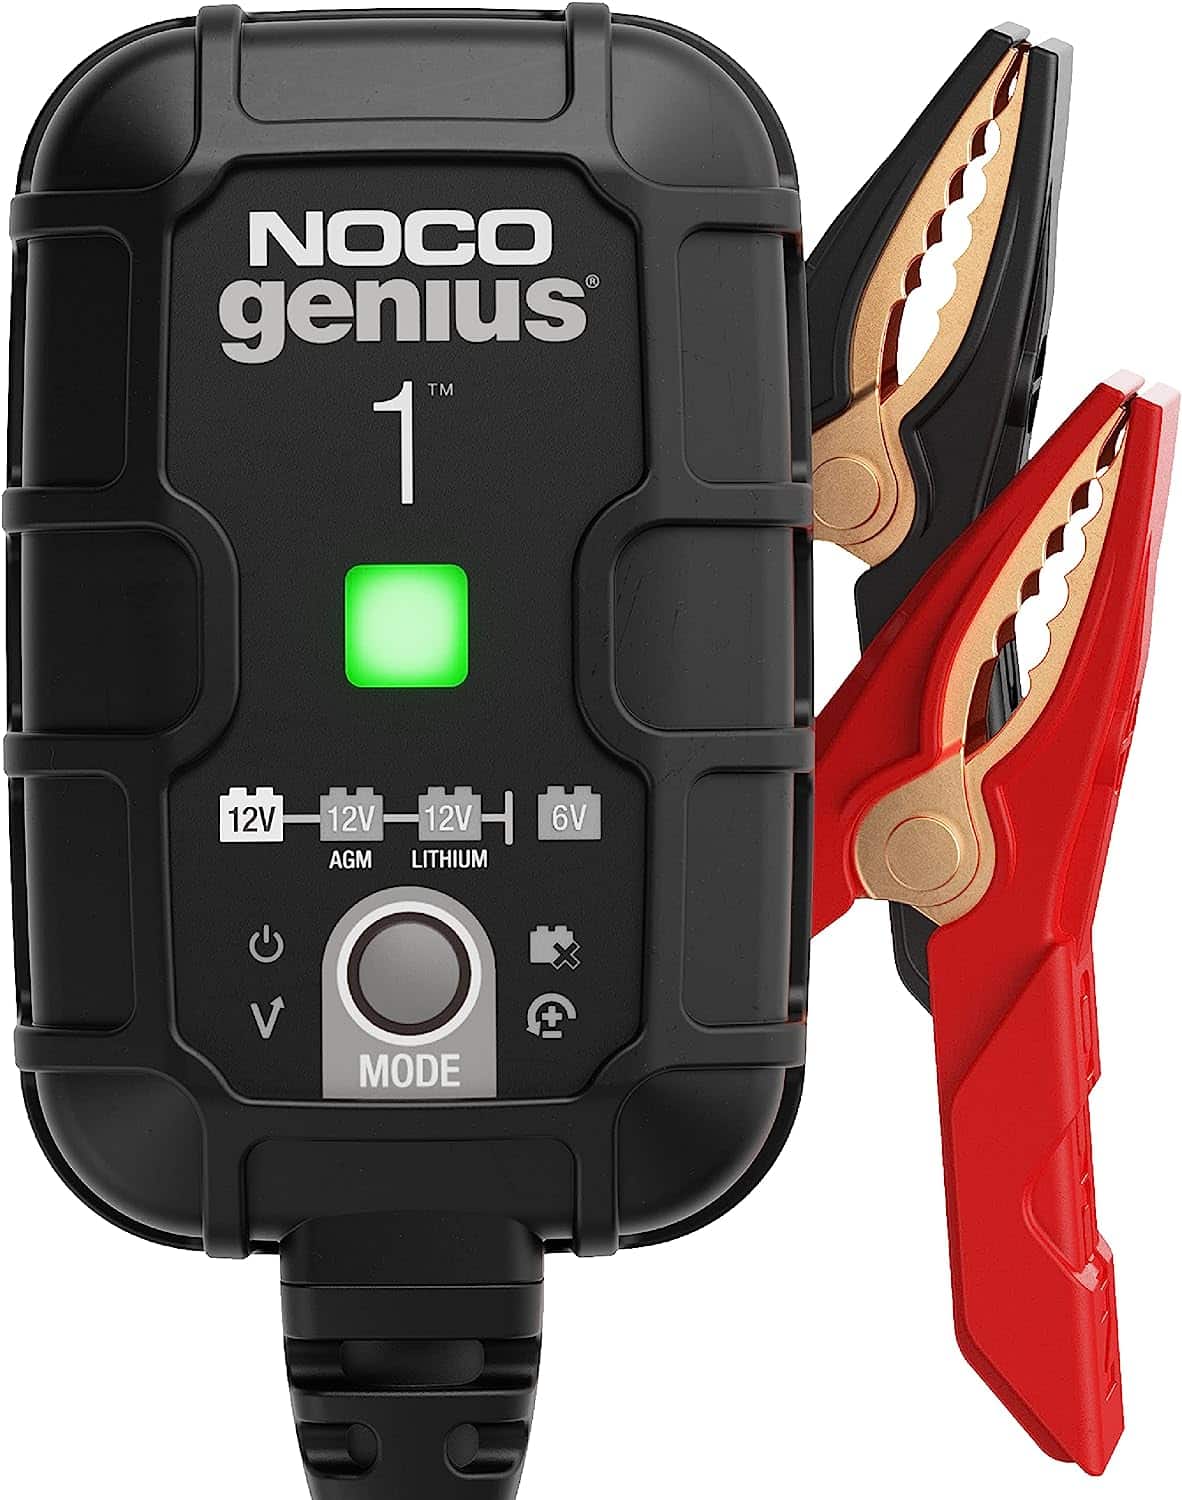 NOCO GENIUS1UK, 1A Car Battery Charger, 6V and 12V Portable Smart Charger 1216